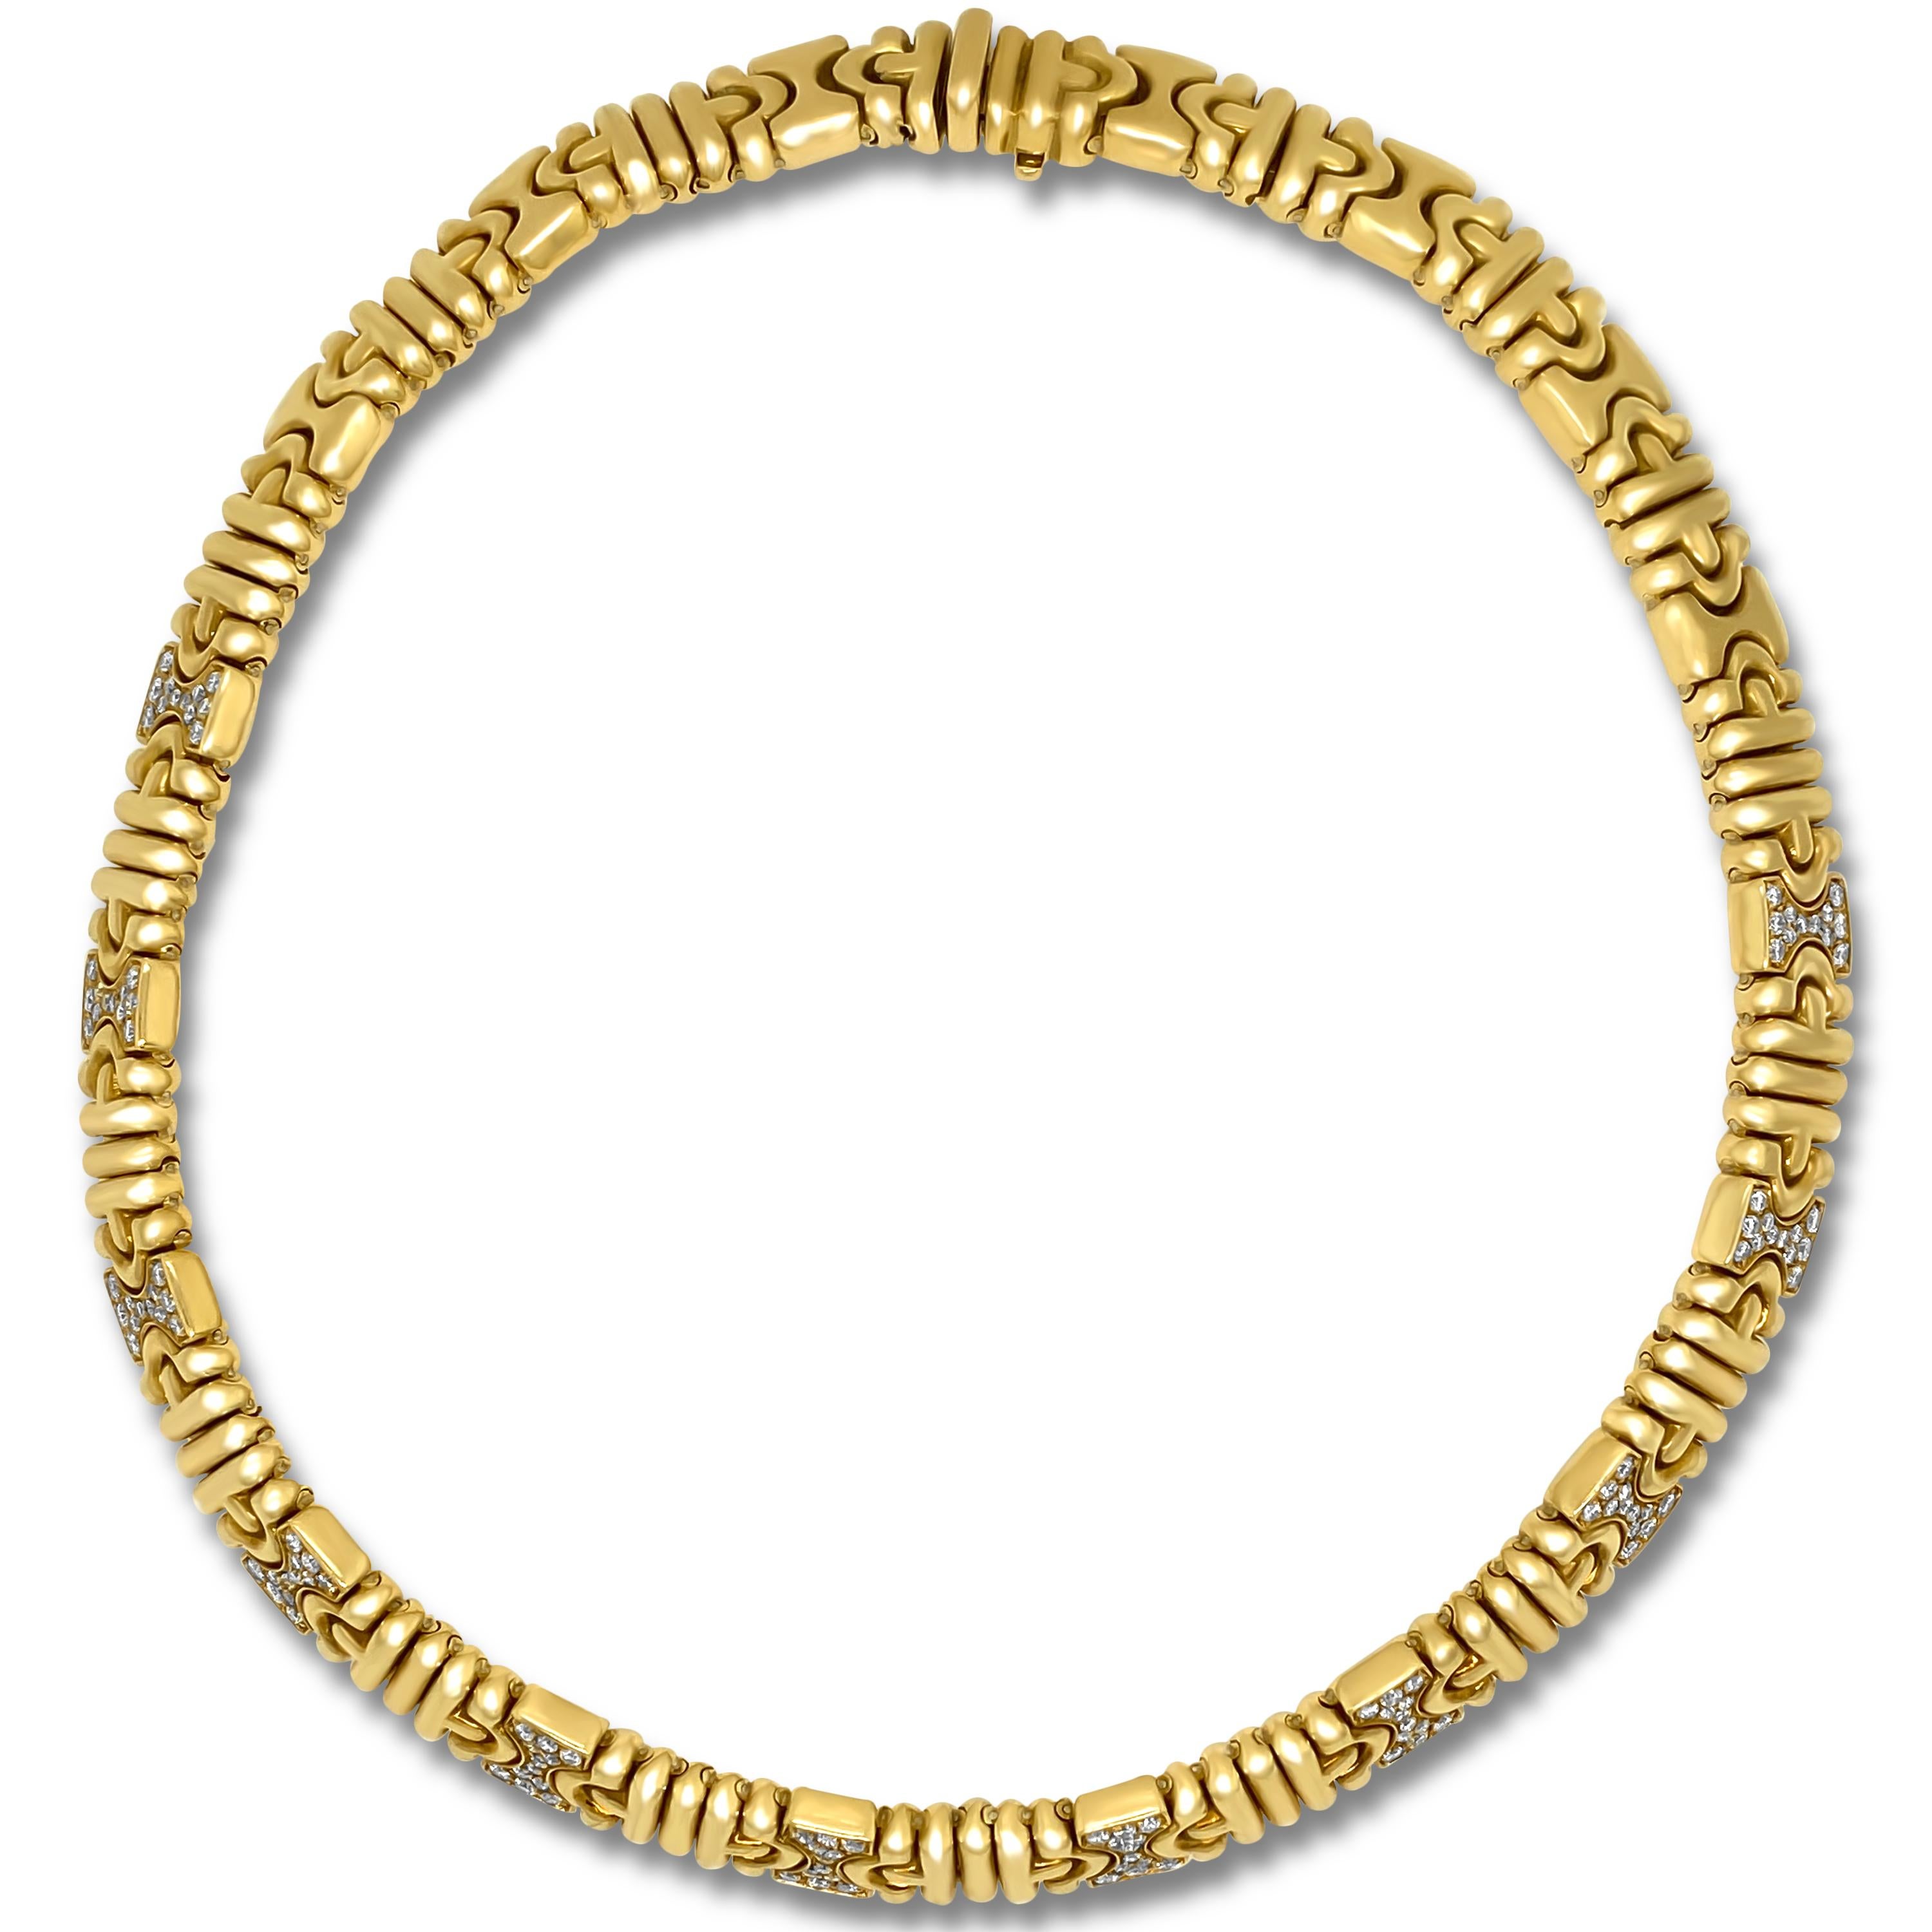 Bvlgari Parentesi 18 Karat Yellow Gold and Diamond Choker Necklace

This iconic necklace by Bvlgari is from the Parentesi collection. Crafted in solid 18K yellow gold and diamonds. 

Apprx. 2.20 carat G color, VS clarity diamonds total